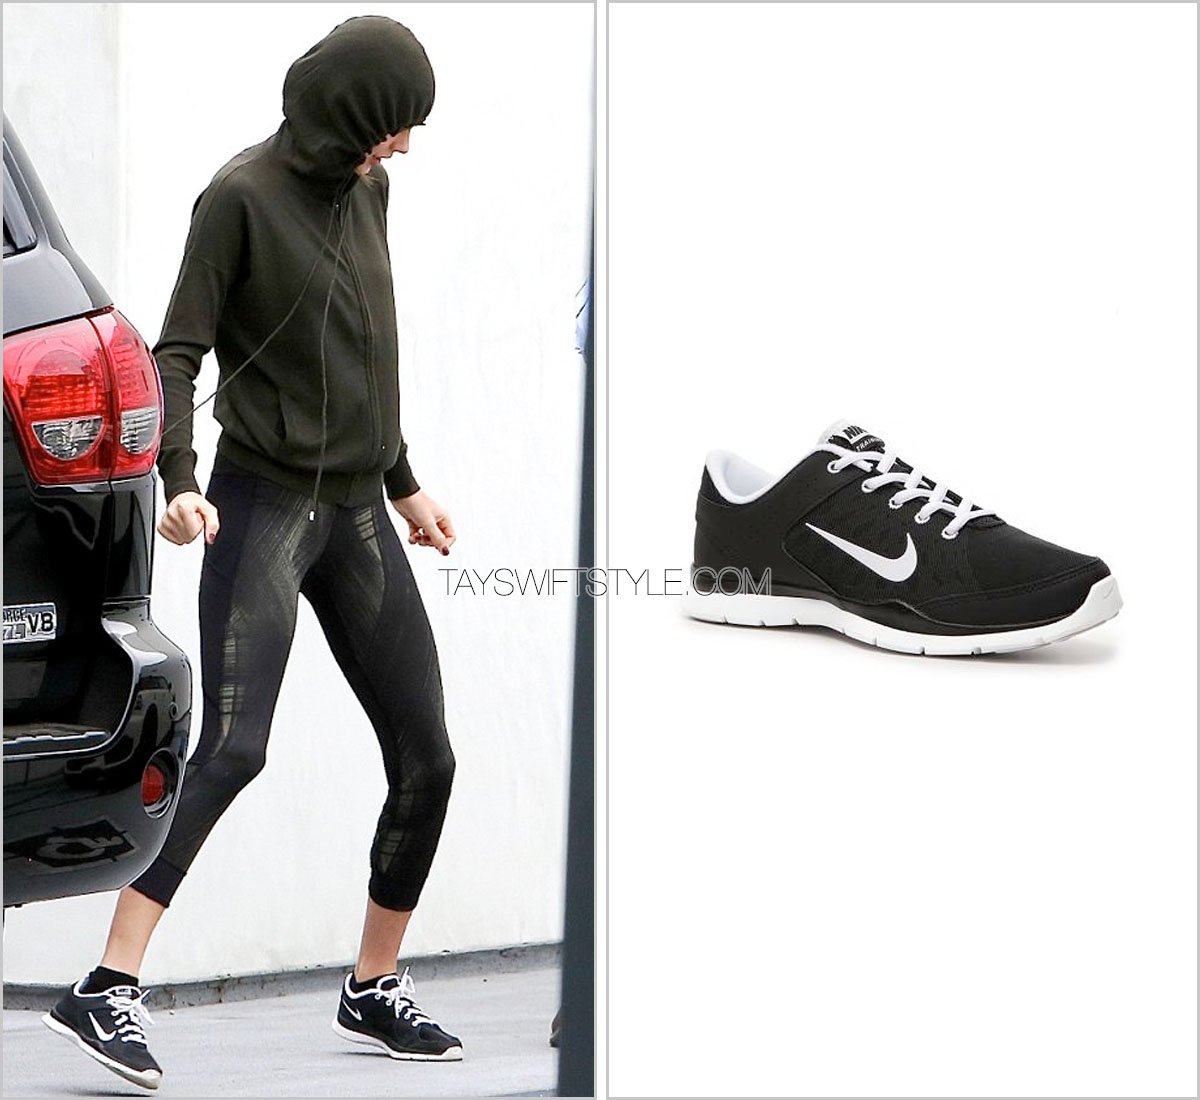 taylor swift nike shoes